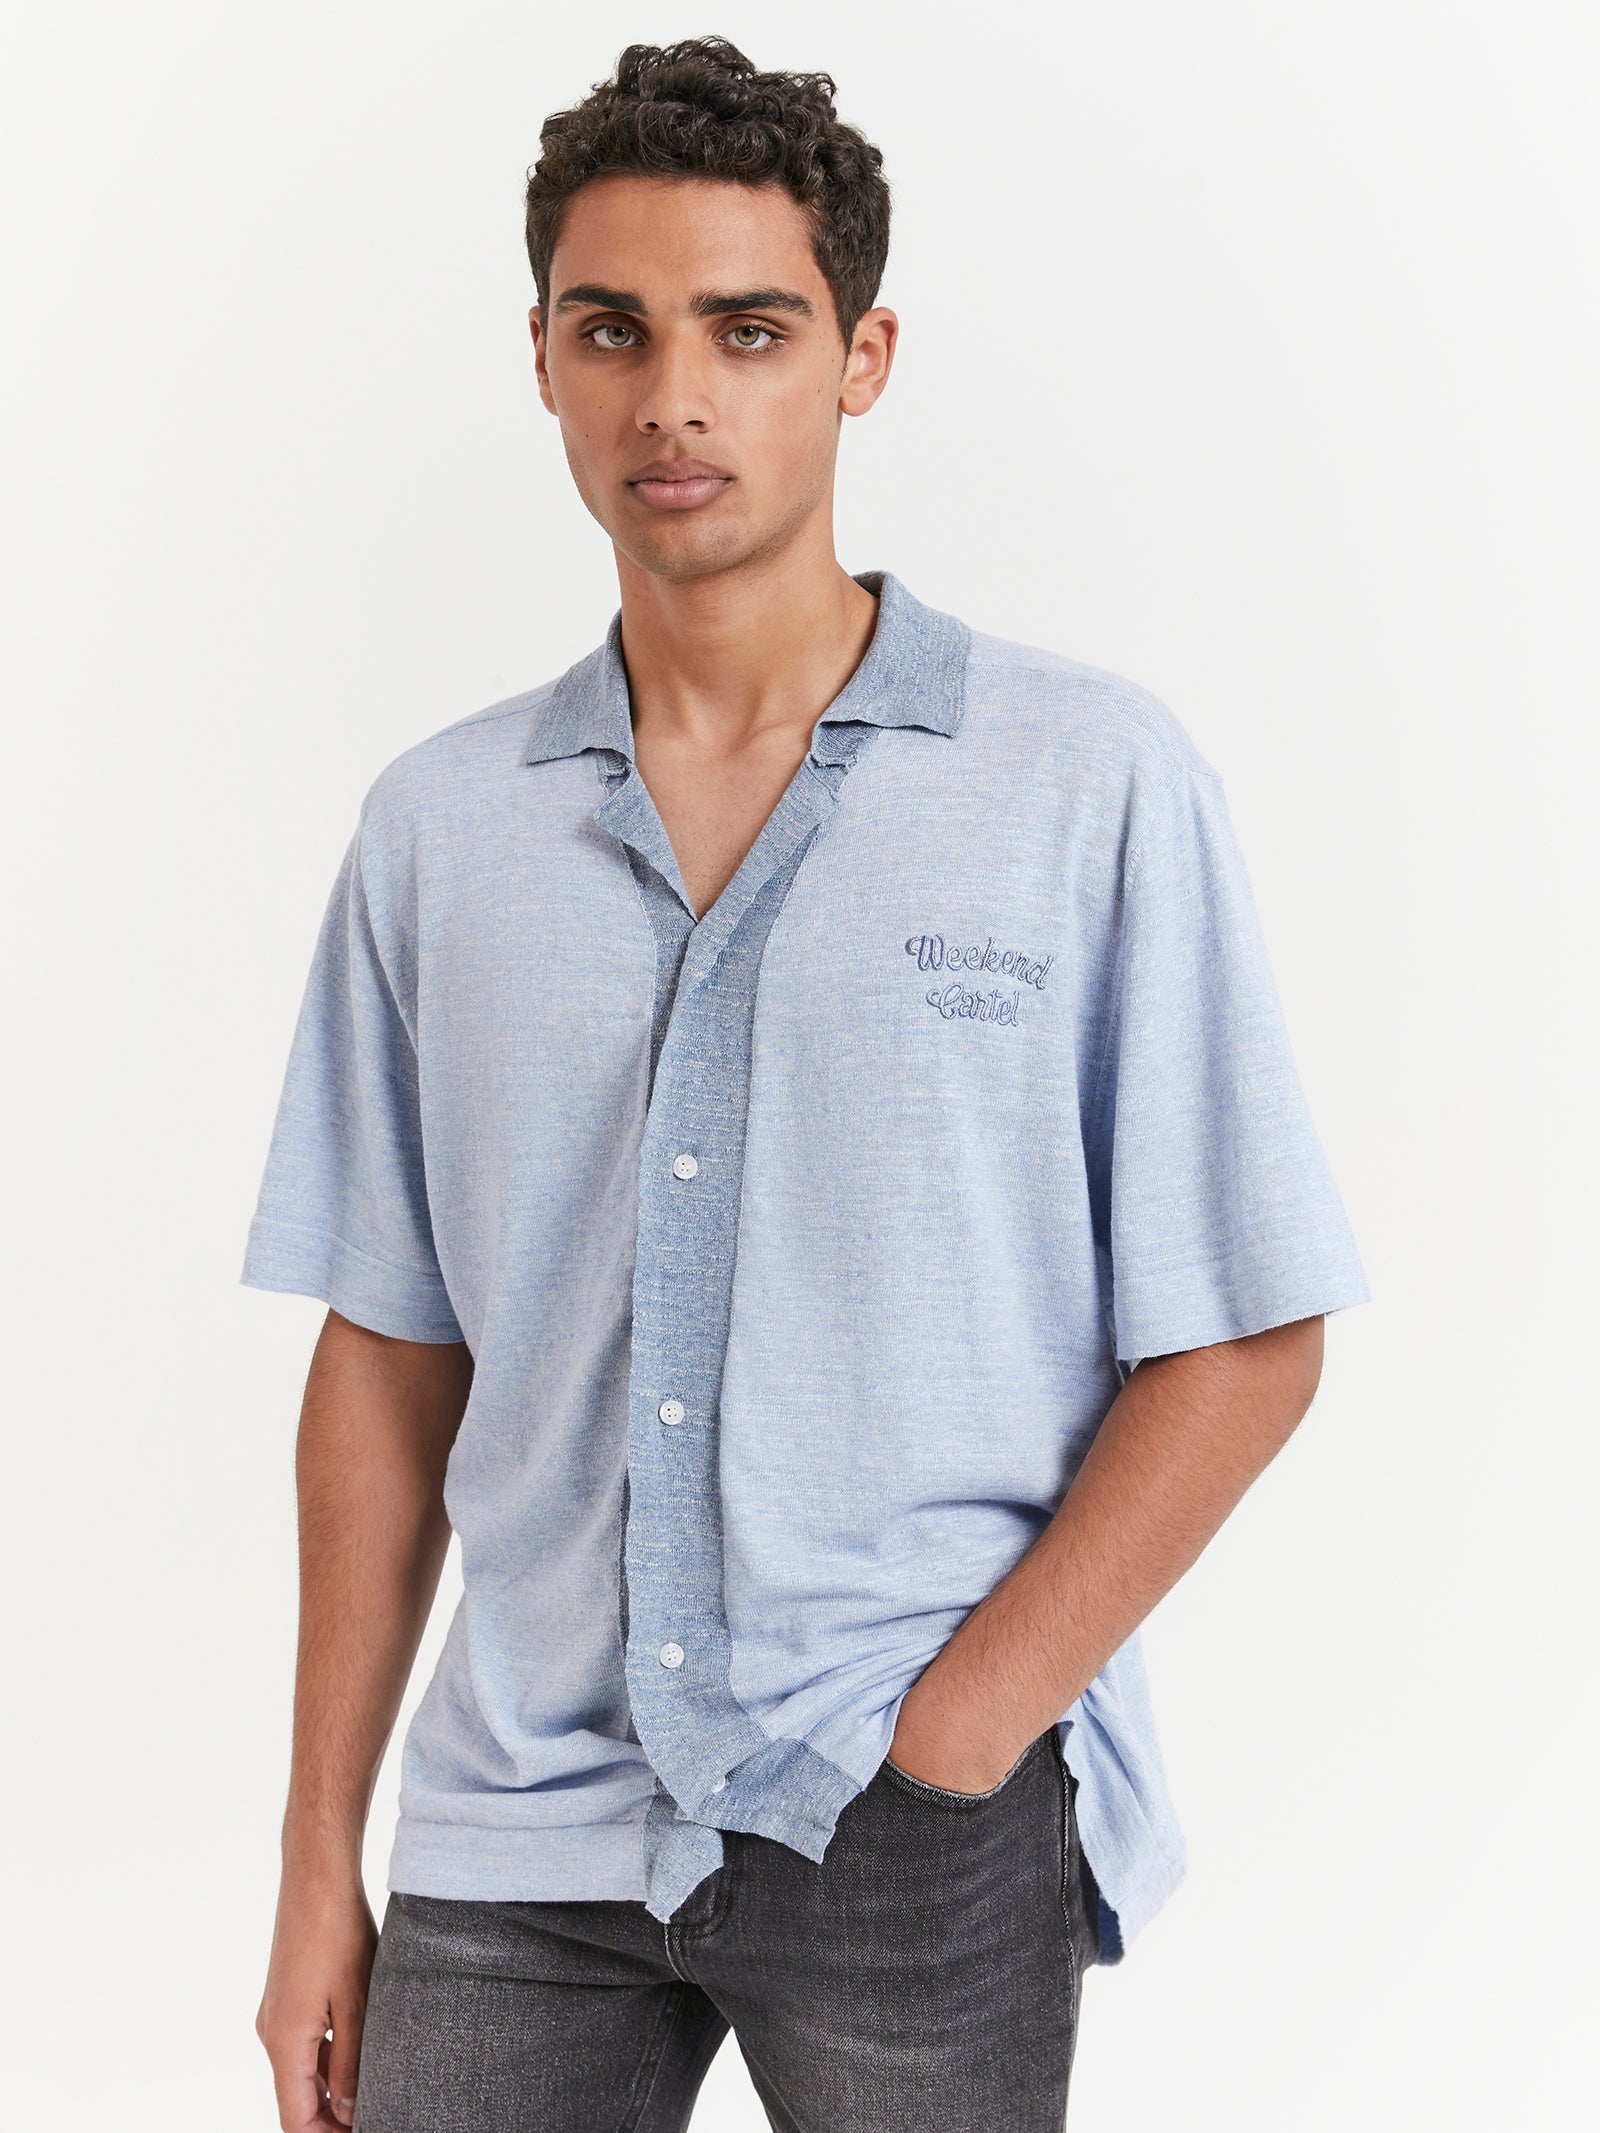 Saloon Knit Shirt in Baby Blue